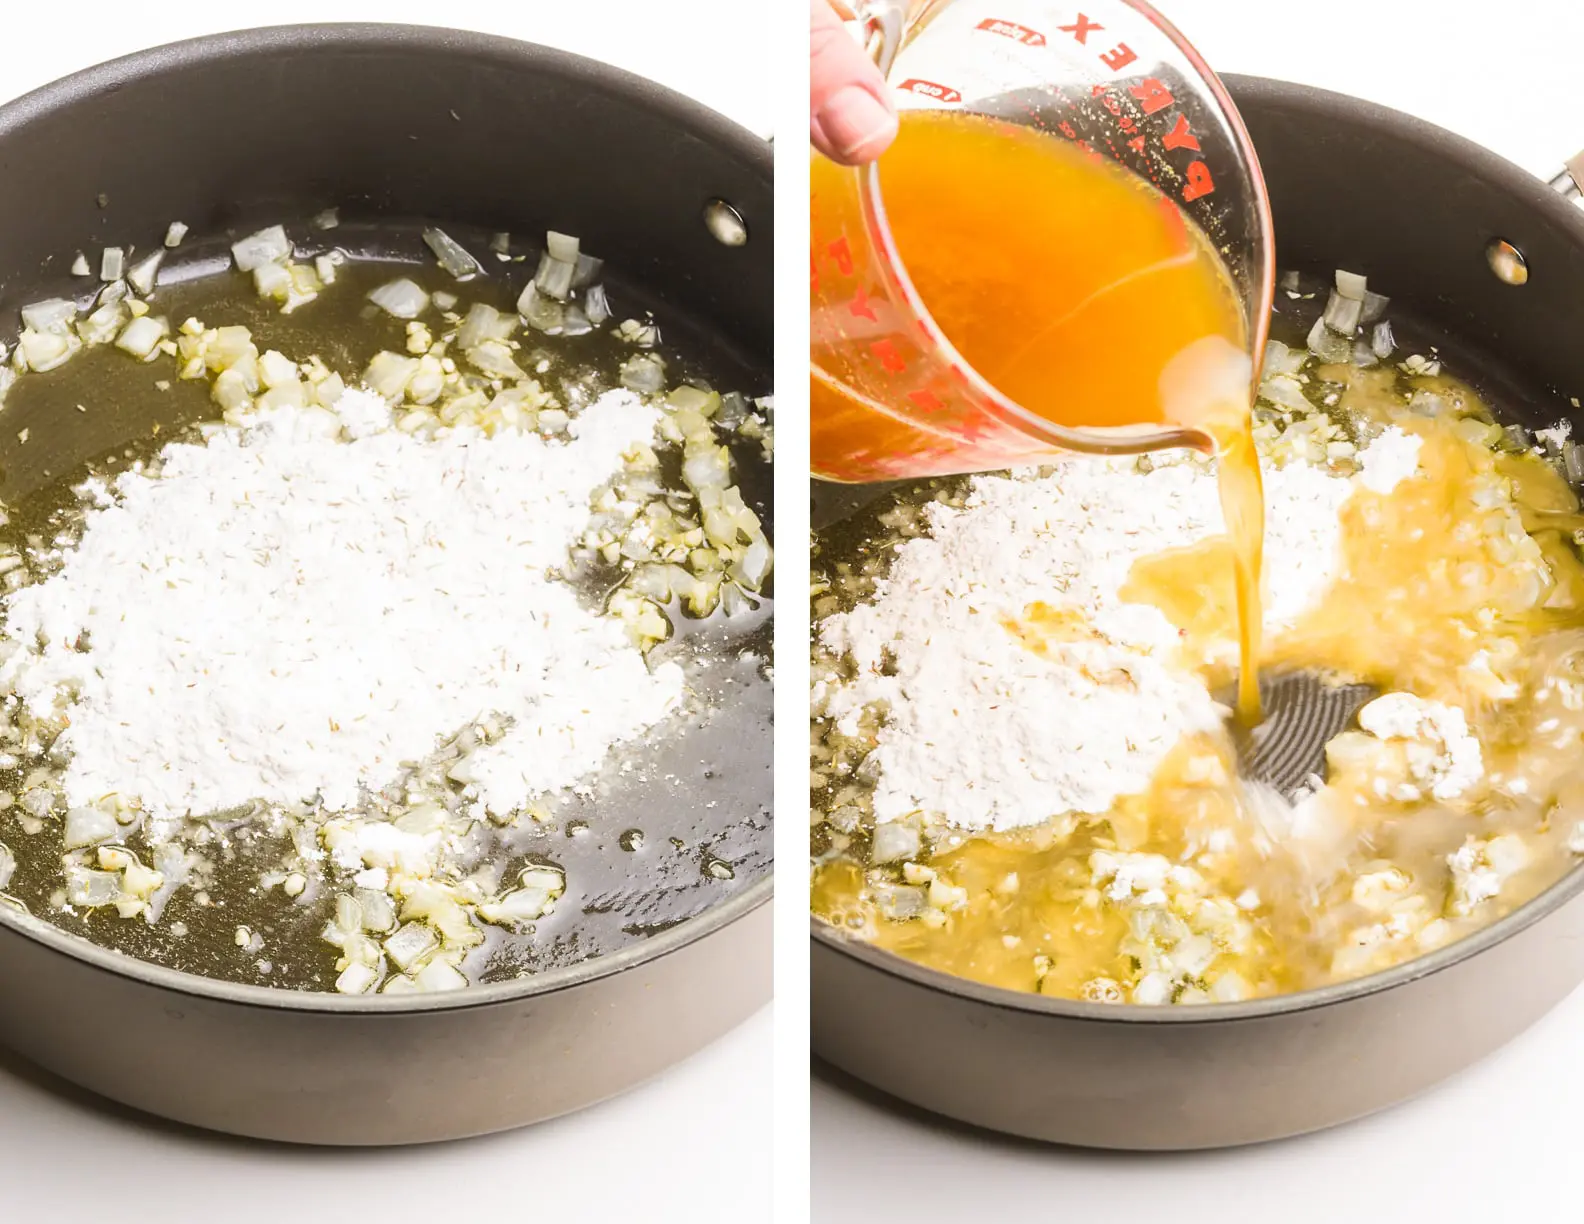 A collage of photos shows flour in a skillet with oil and cooked onions on the left. Broth is being poured into that mixture on the right.